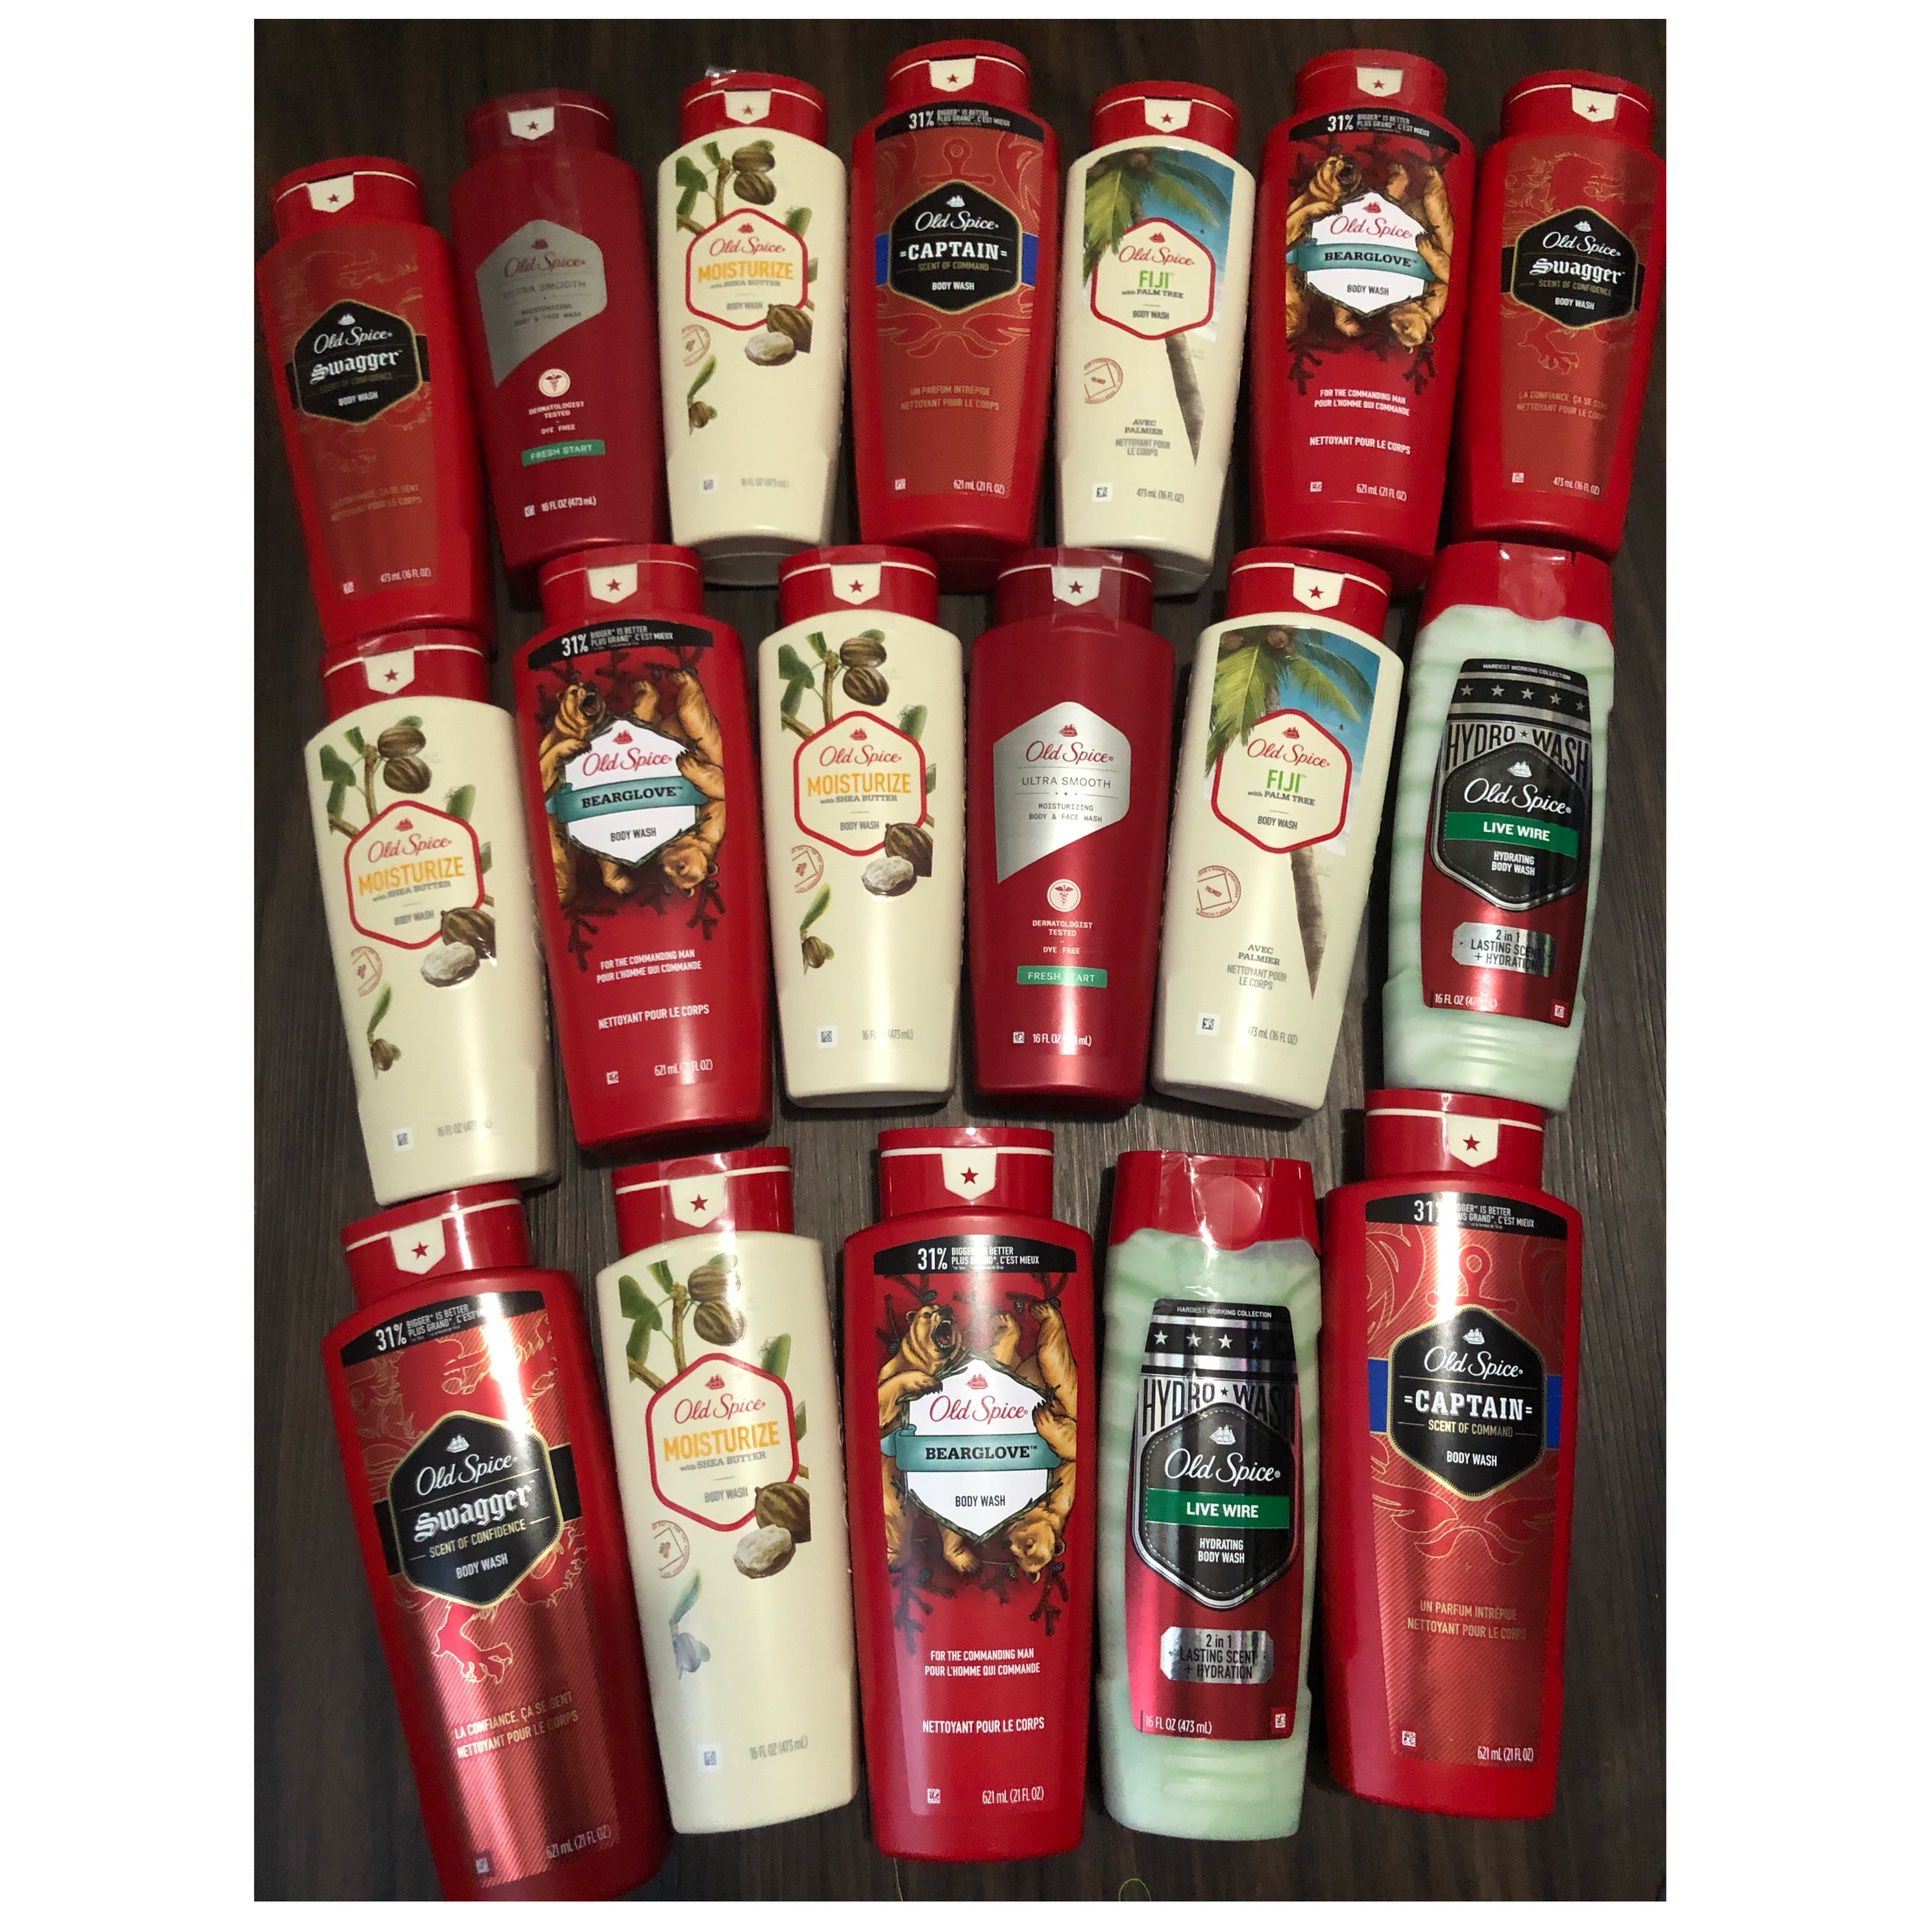 Old Spice Body Wash $20 for 4 + 2 free toothpaste